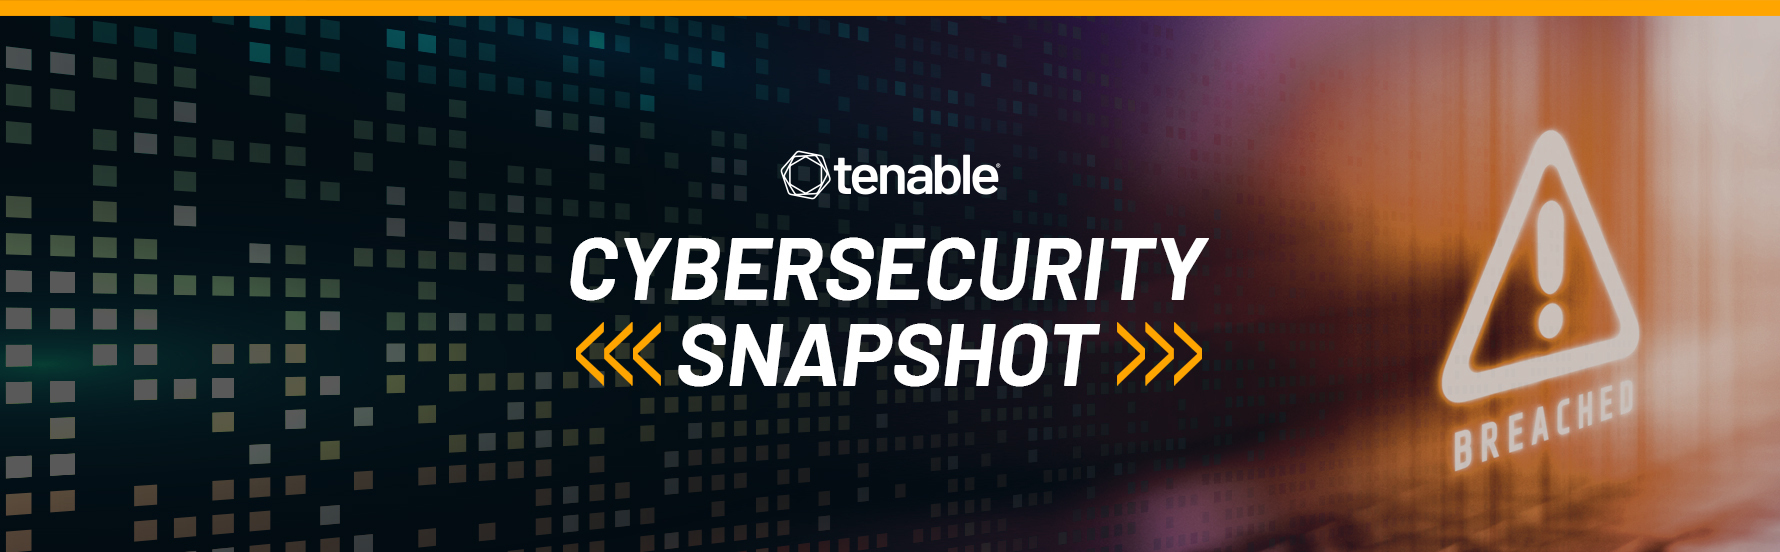 Cybersecurity Snapshot: Insights on Log4j, Memory Attacks, Cloud Security, Ransomware